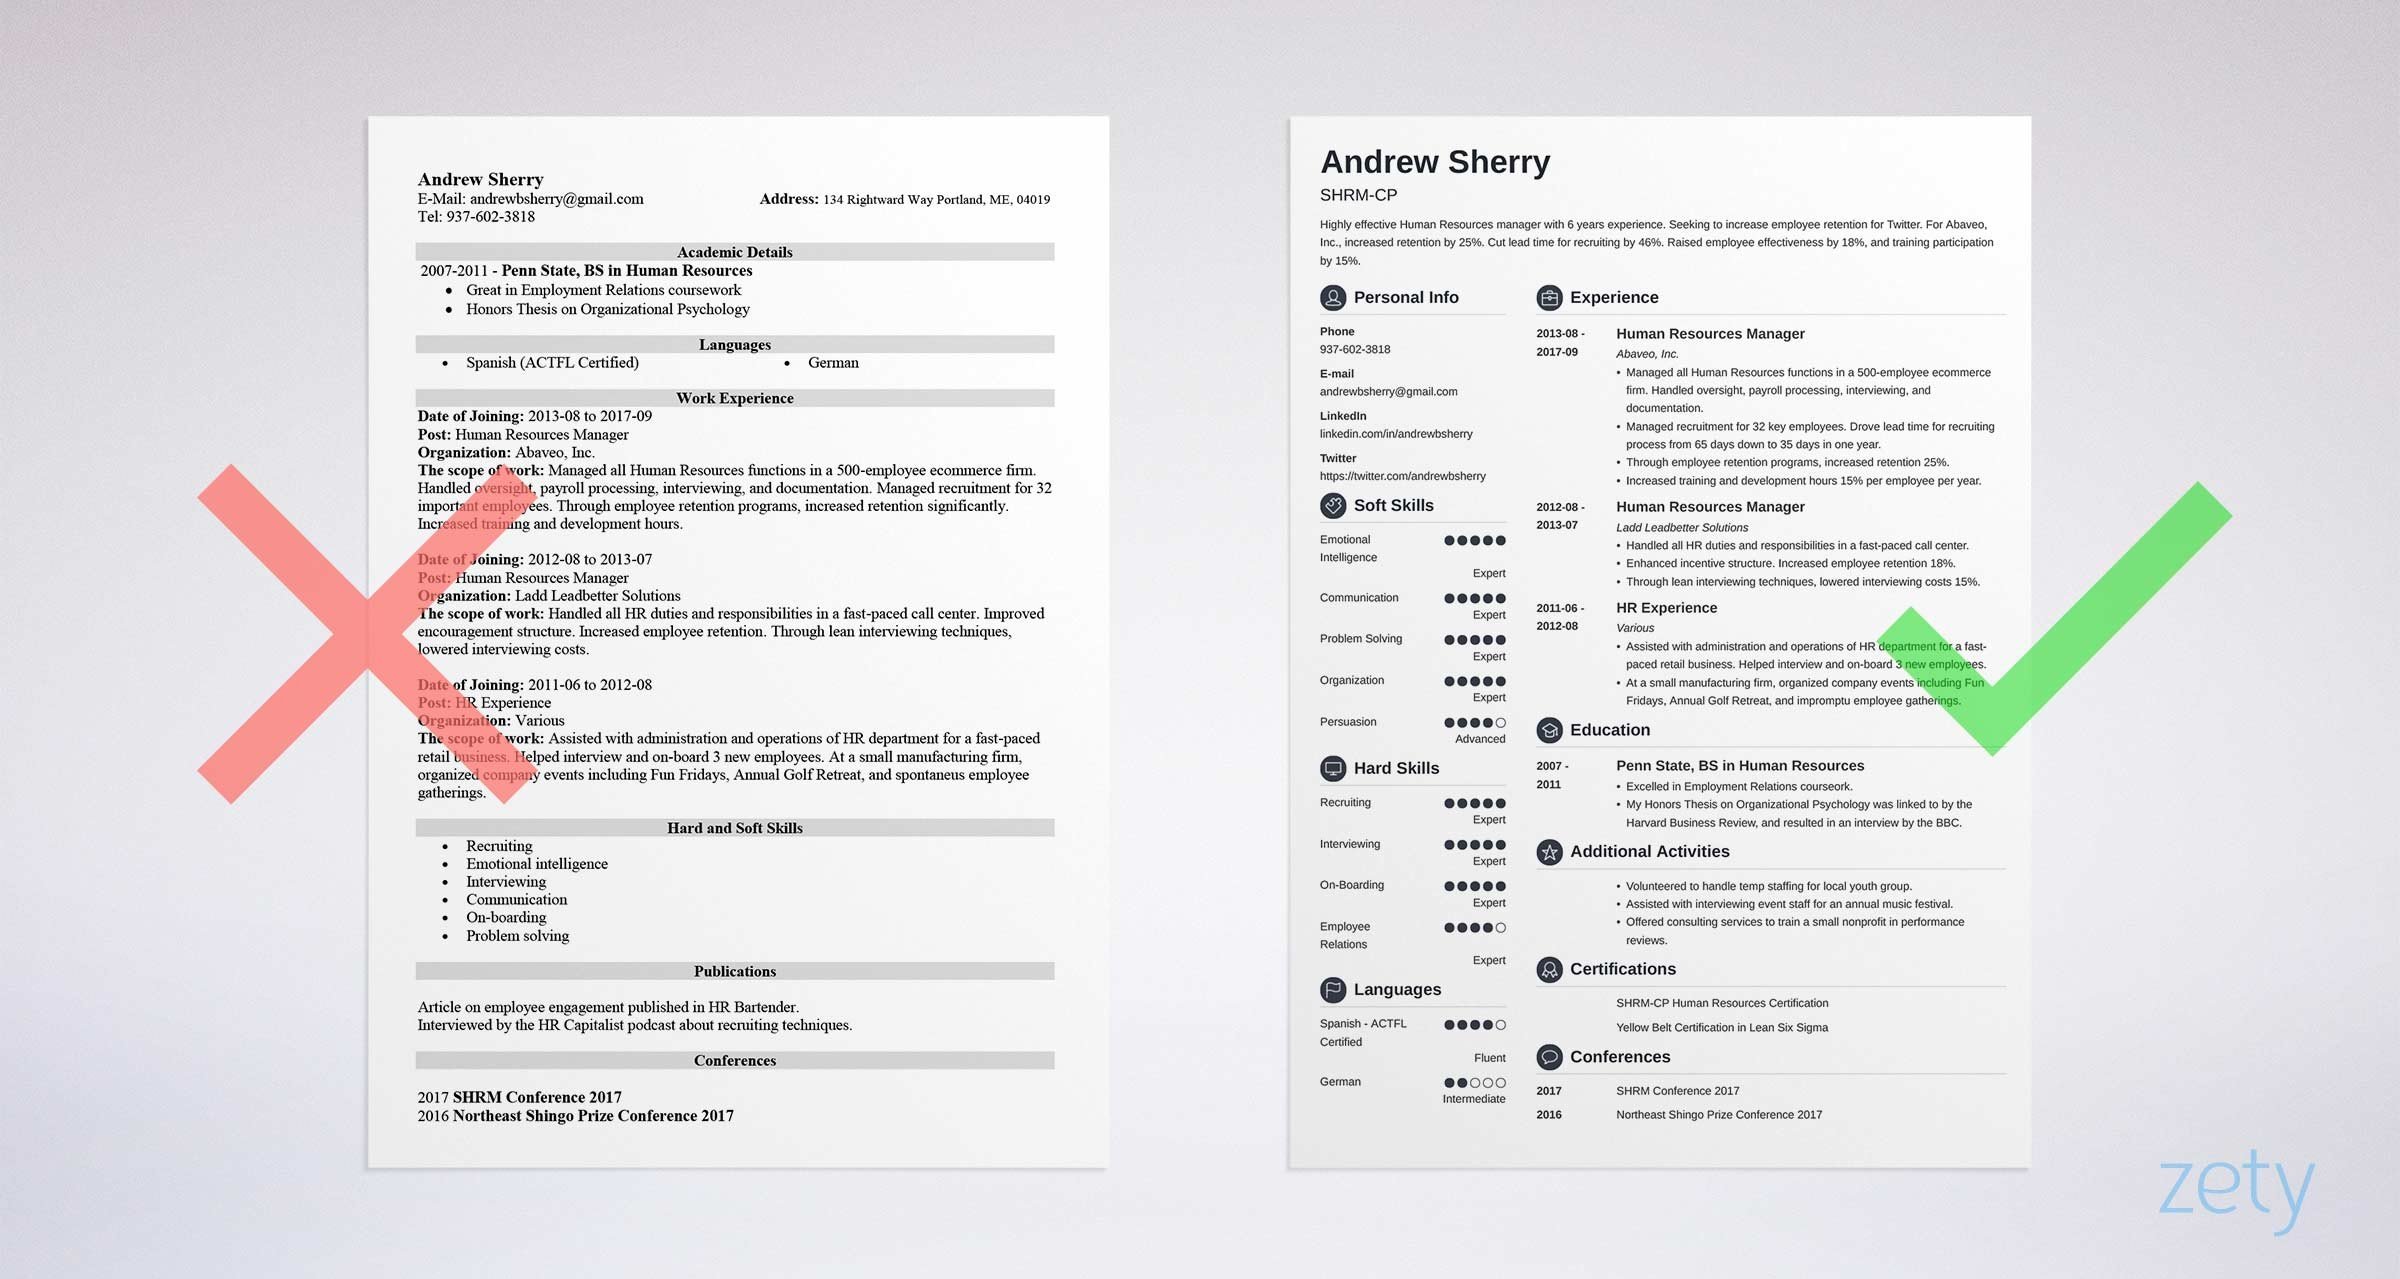 Resume Paper: What Type of Paper Is Best for a Resume? (12 Photos)